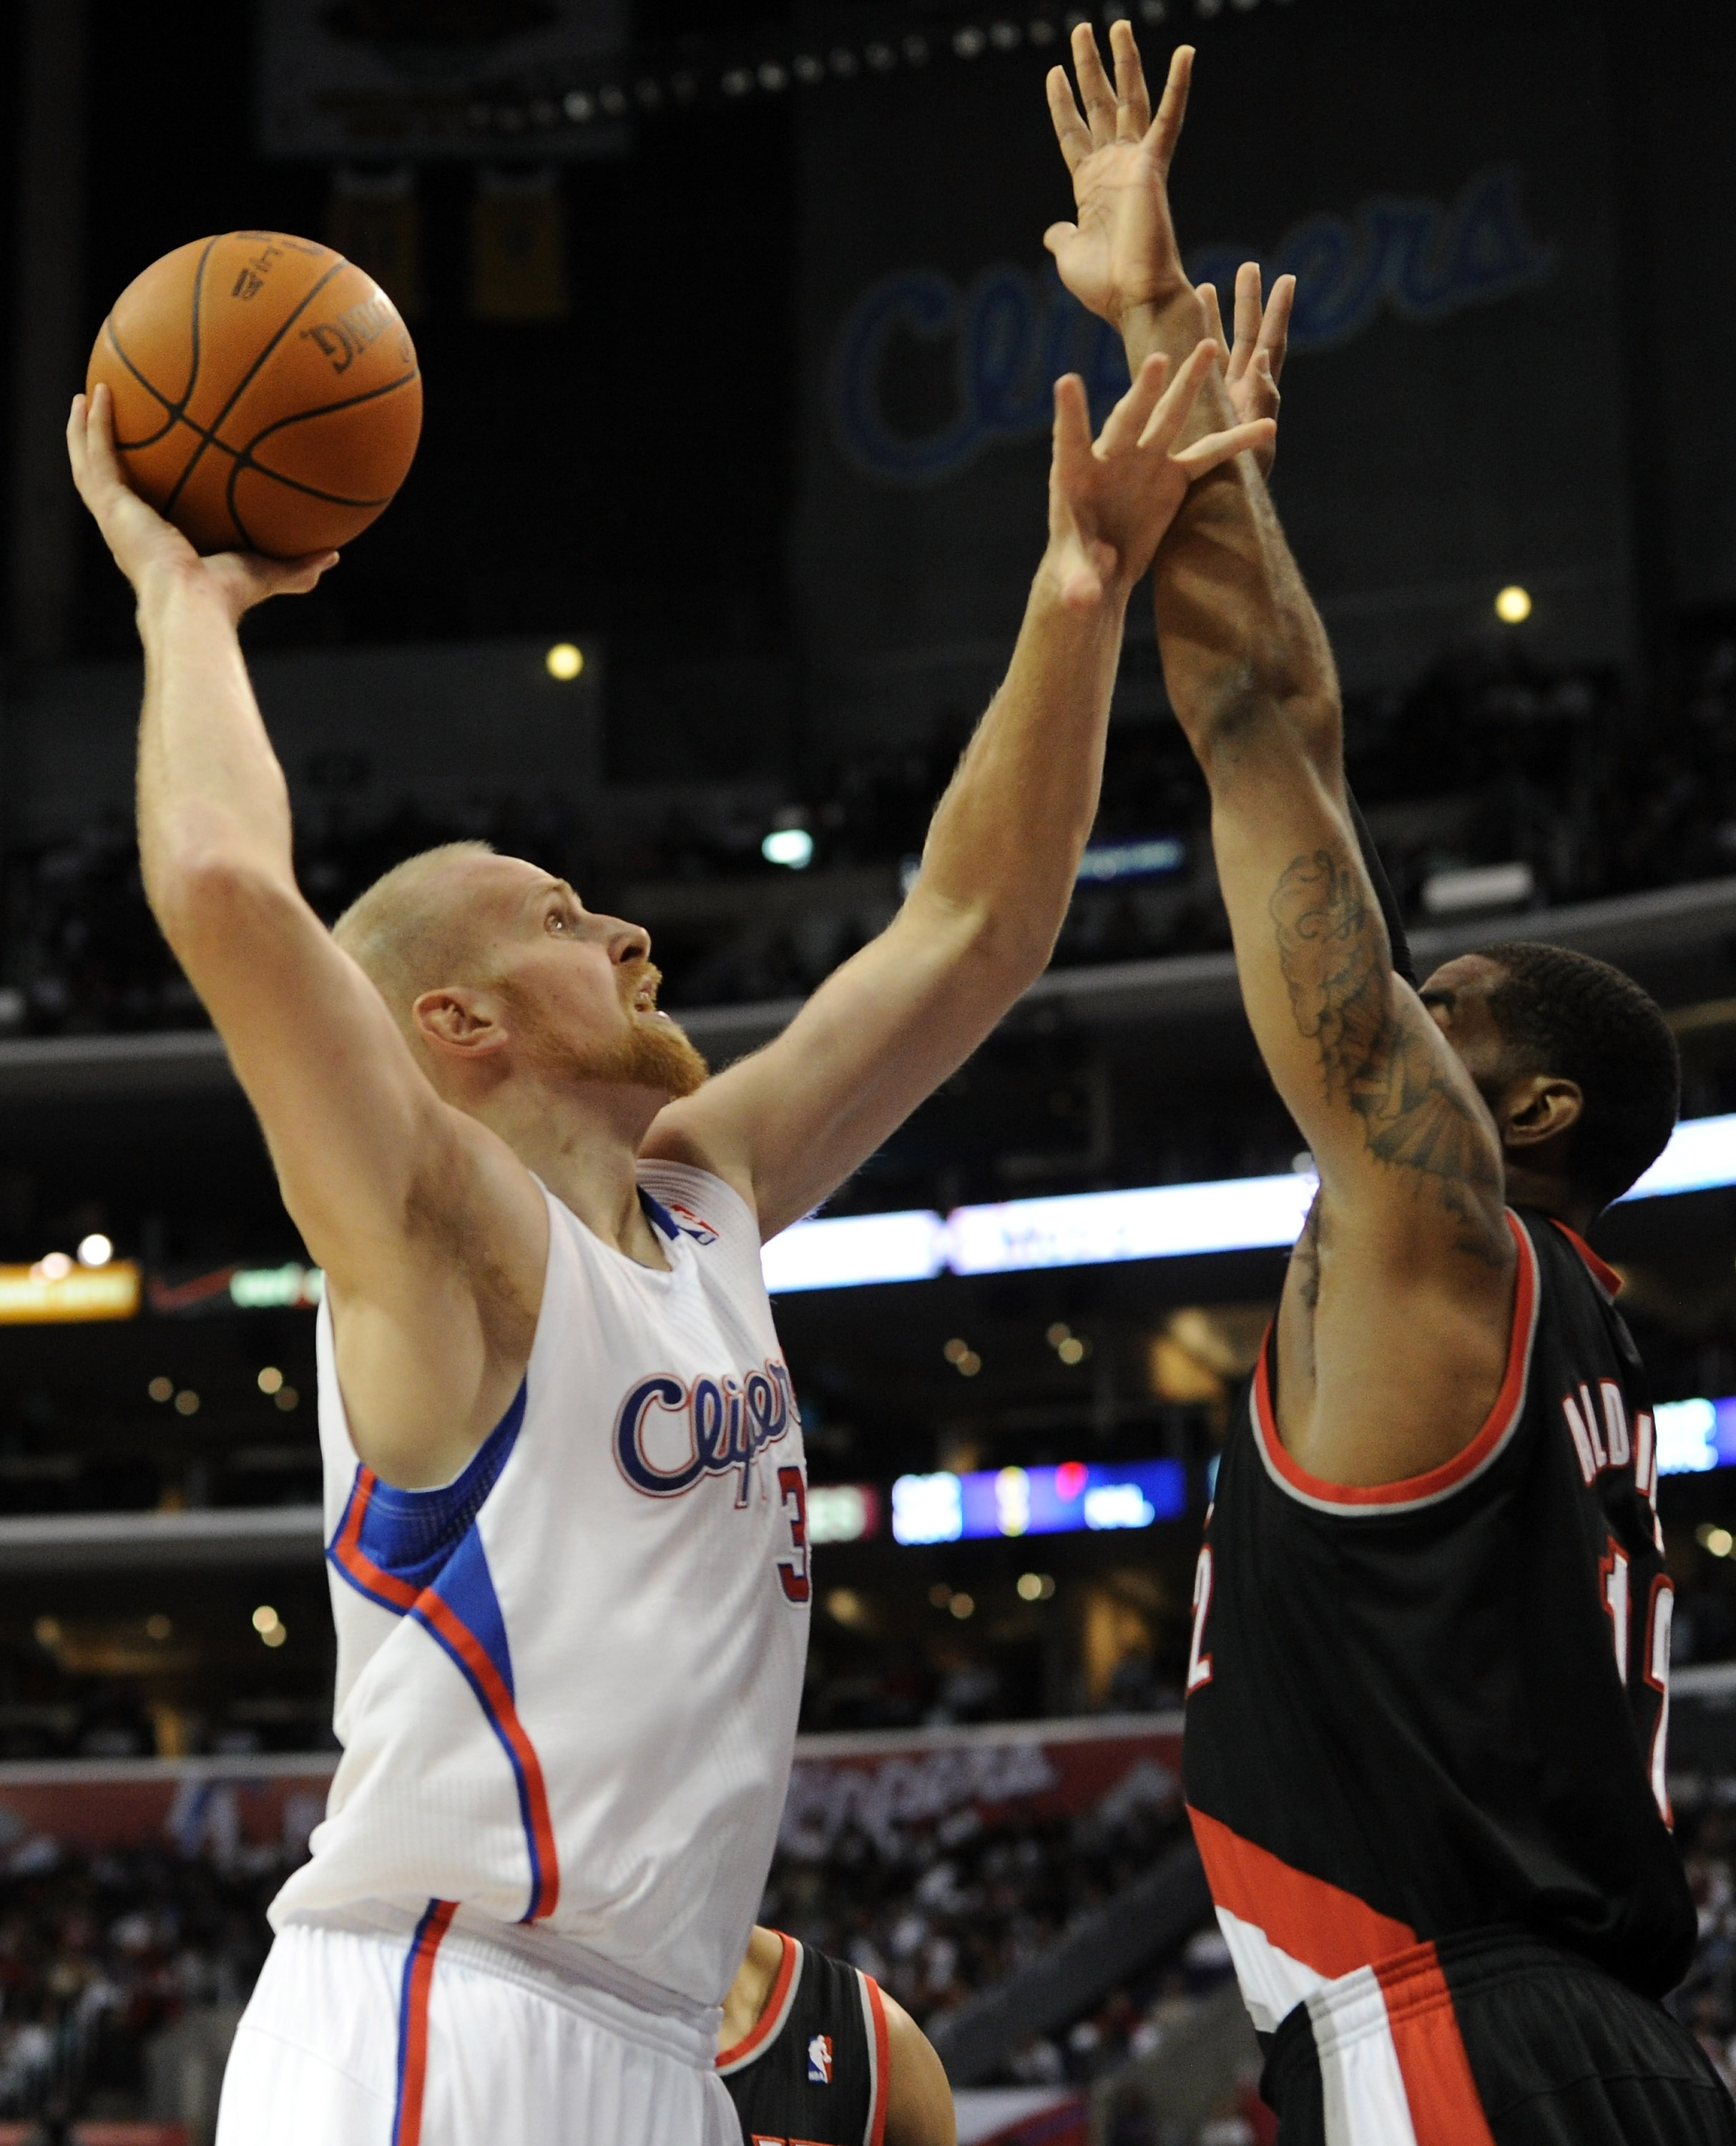 LOS ANGELES, CA - OCTOBER 27:  Chris Kaman #35 of the Los Angeles Clippers shoots a jump hook over LaMarcus Aldridge #12 of the Portland Trail Blazers at Staples Center on October 27, 2010 in Los Angeles, California. NOTE TO USER: User expressly acknowled